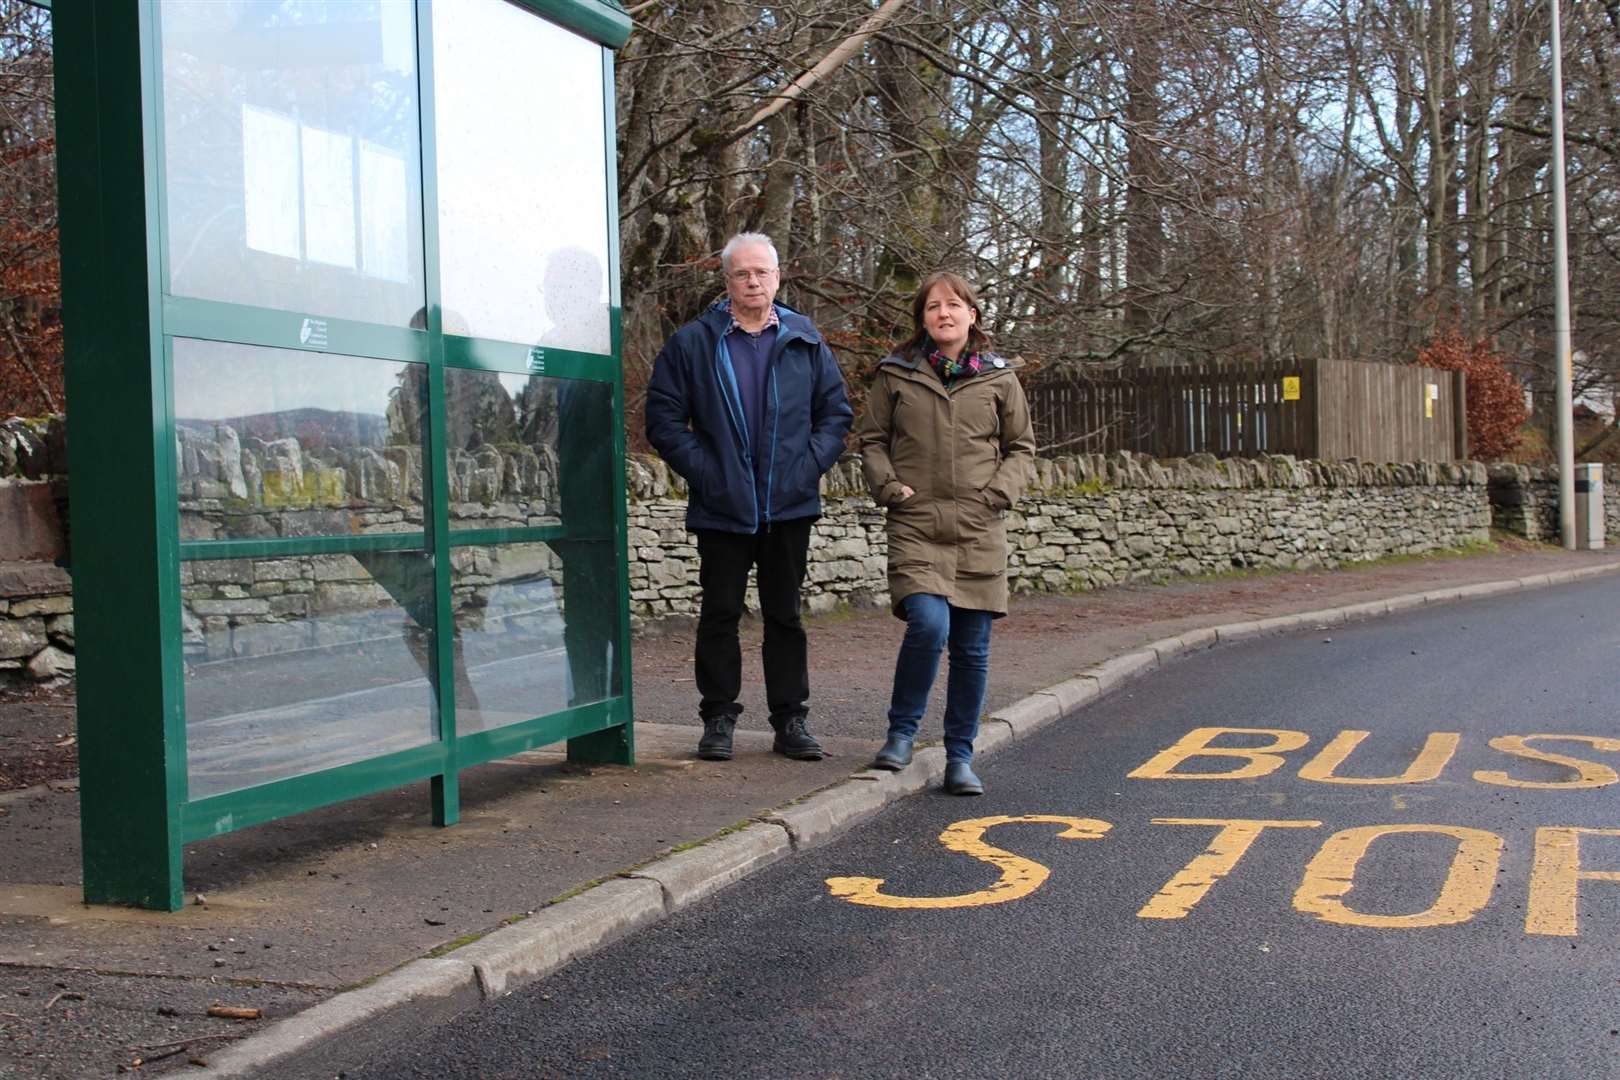 Maree Todd with SNP councillor Ian Cockburn at a bus stop in Contin. The picture was taken prior to the pandemic.